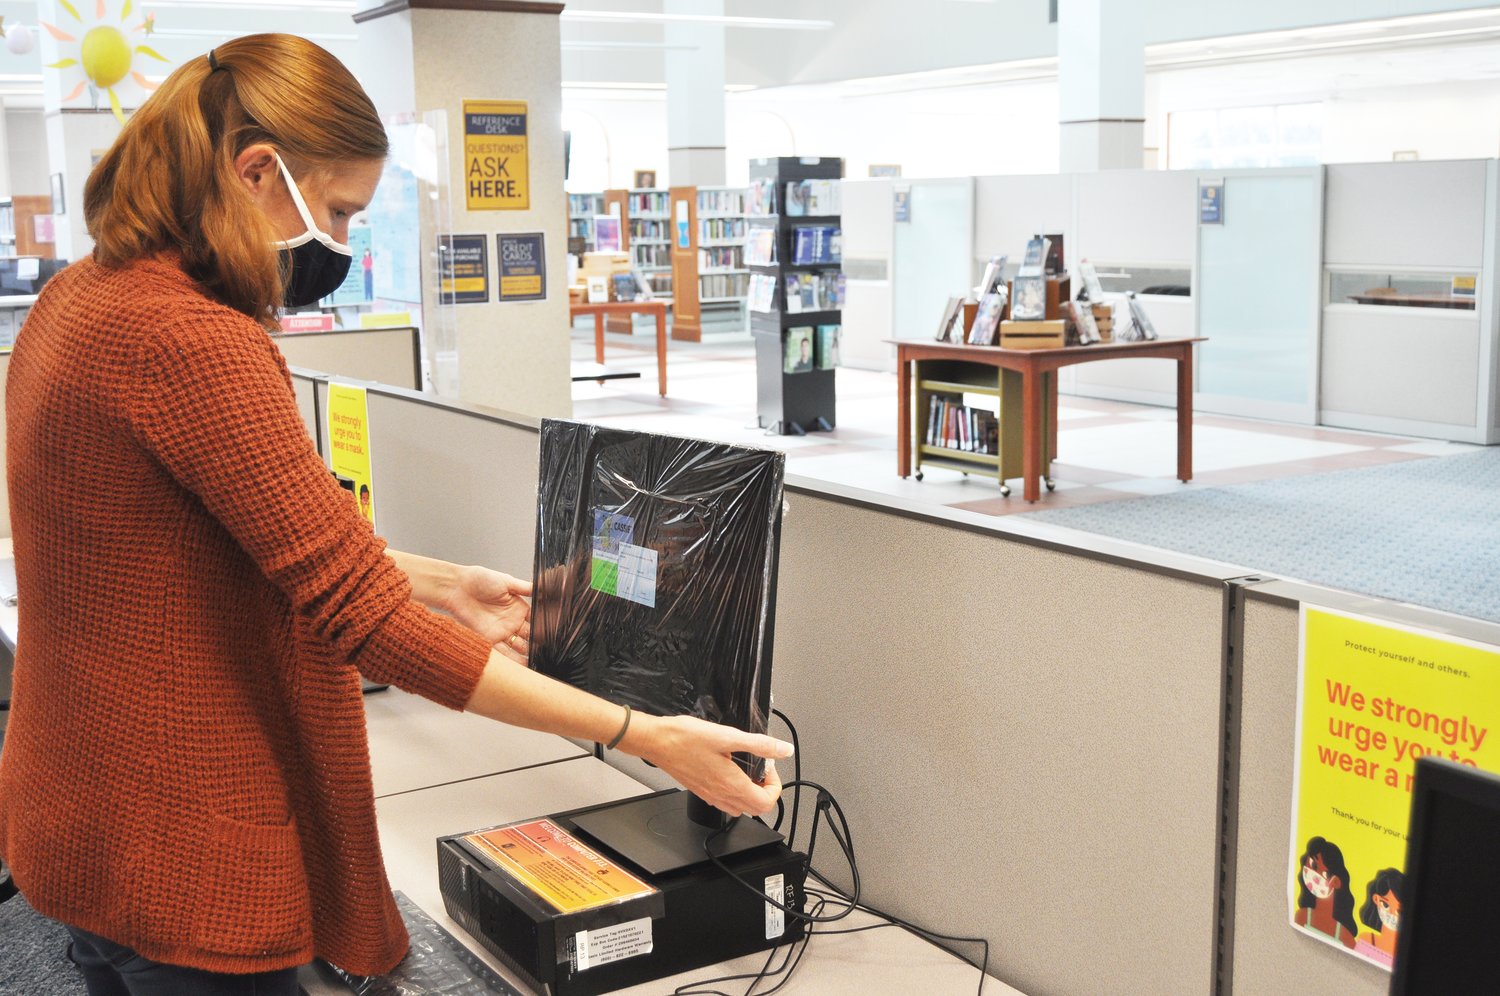 Megan Noggle adjusts a computer monitor after wrapping it with a plastic covering Wednesday at the Crawfordsville District Public Library. The library, which reopened Monday, strongly urges patrons to wear a mask and requires employees to cover their faces in public areas of the building.